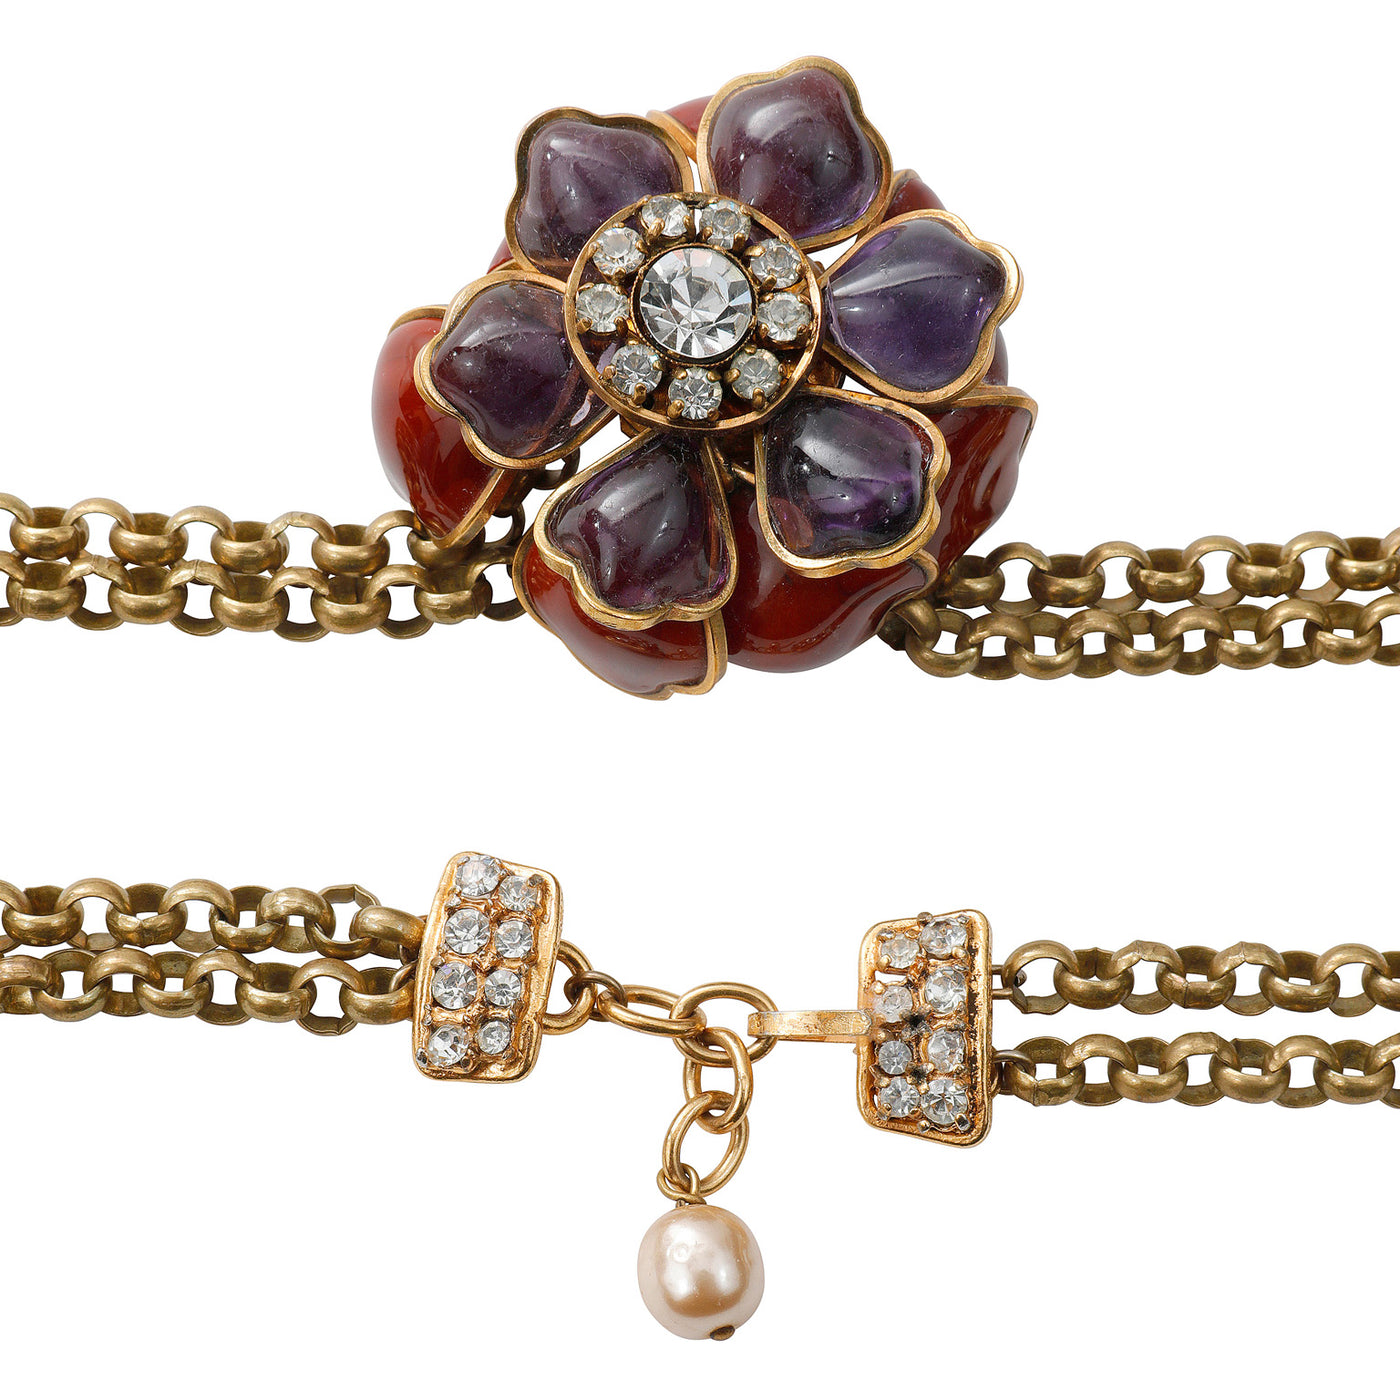 Chanel Vintage Gripoix and Pearl Camellia Choker